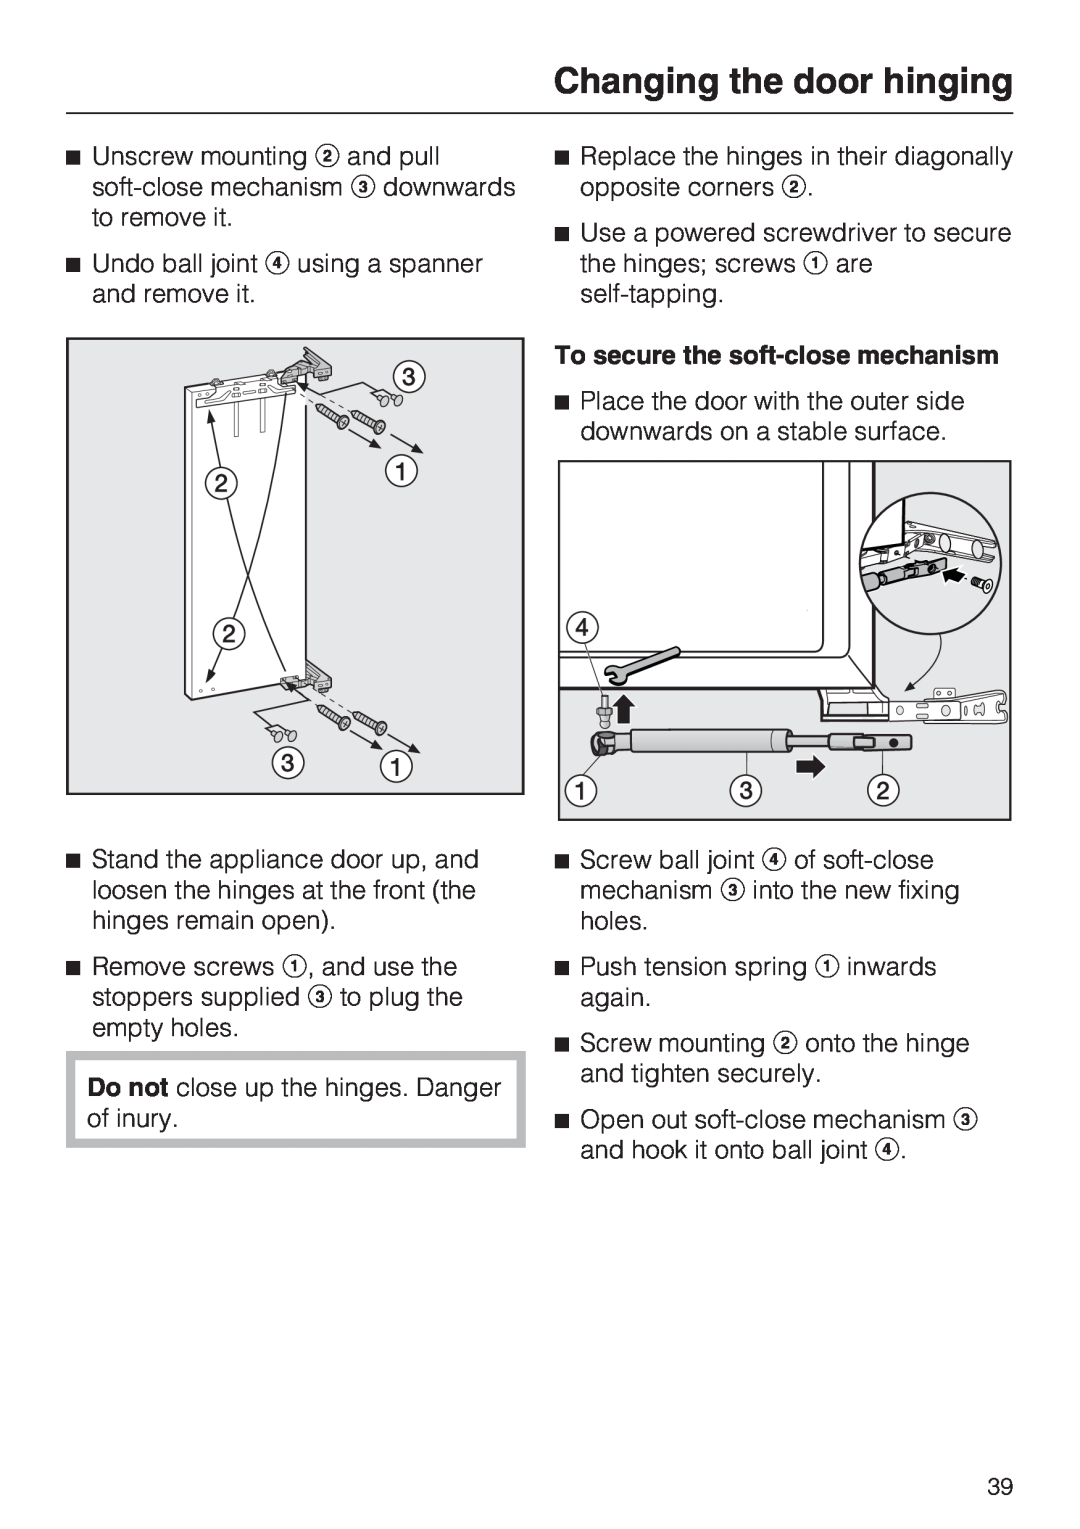 Miele K9552, K9752 installation instructions To secure the soft-closemechanism, Changing the door hinging 